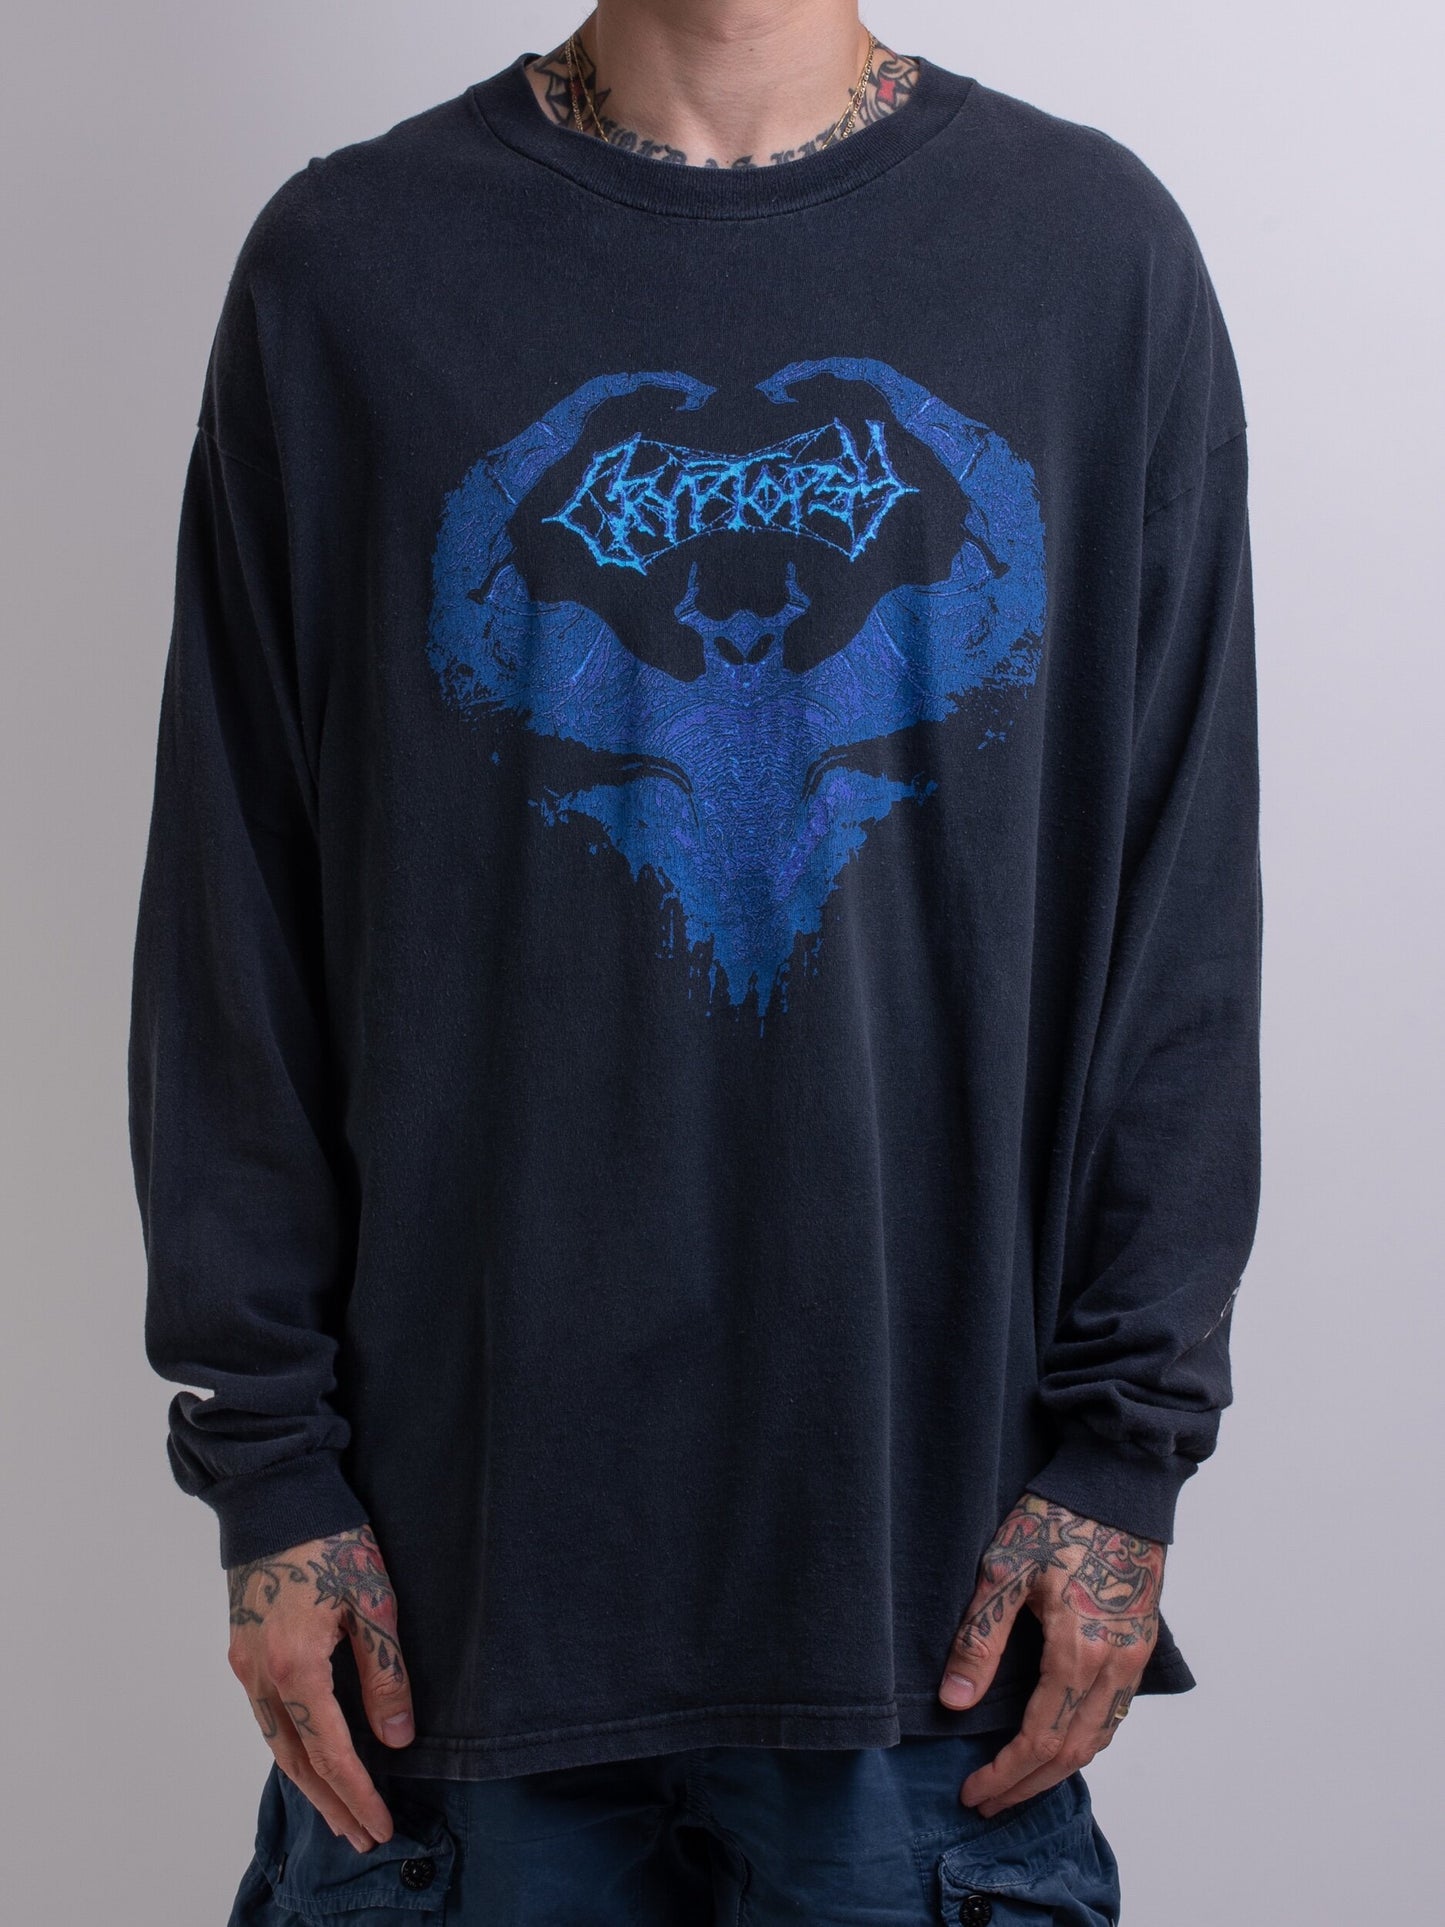 Vintage 90’s Cryptopsy Whispers Supremacy Longsleeve